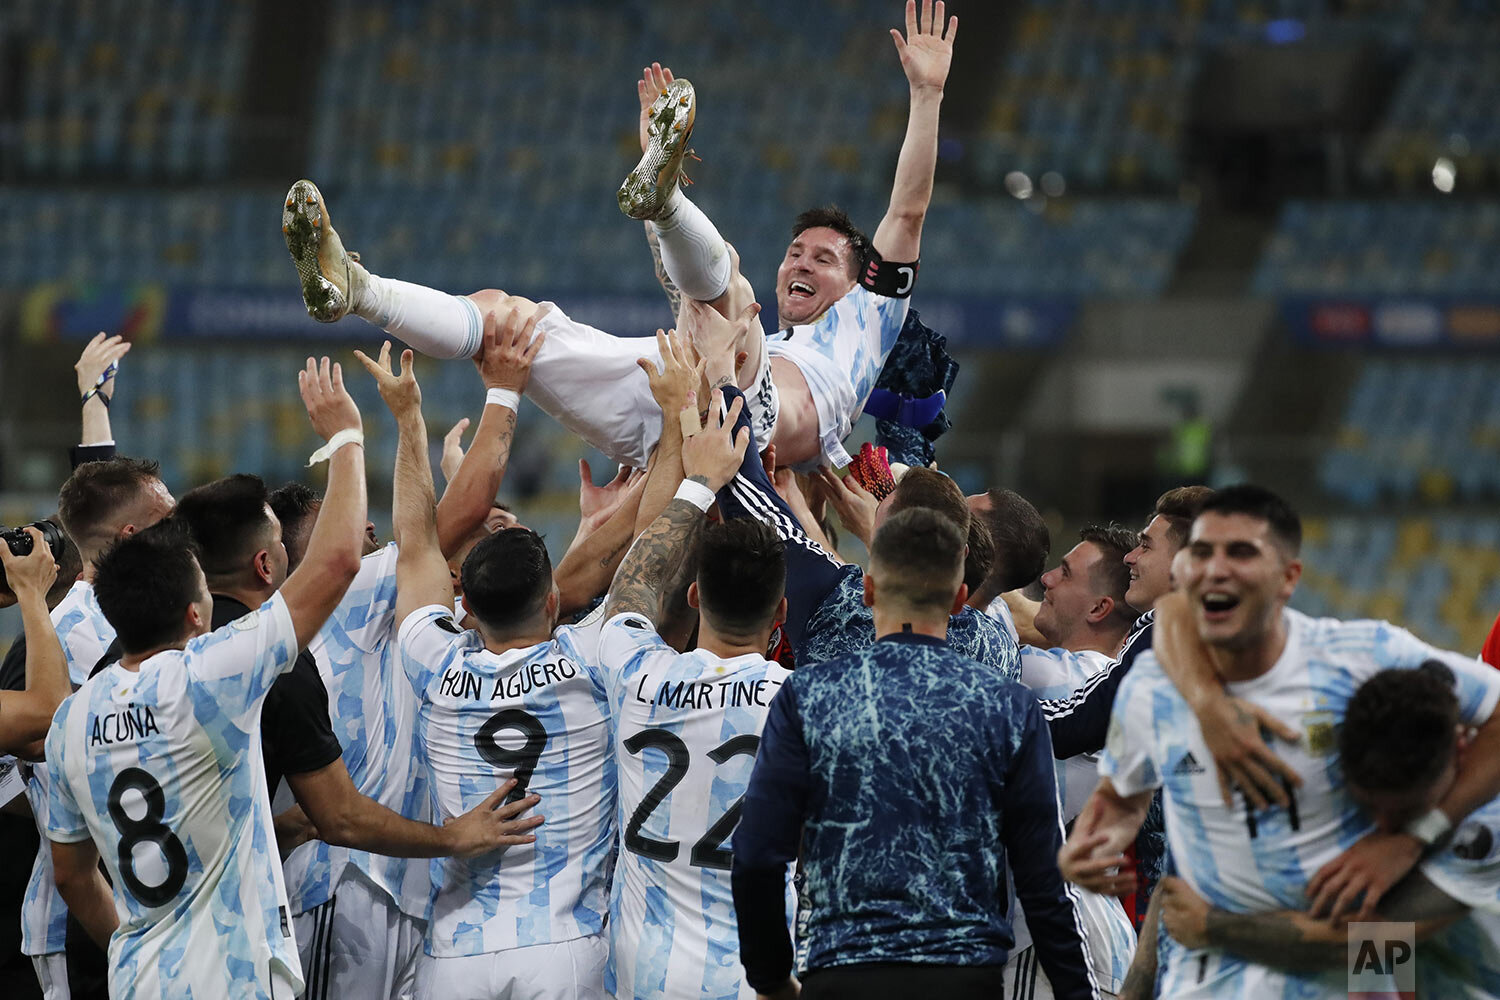  Teammates lift Argentina's Lionel Messi after their 1-0 victory over Brazil during the Copa America final soccer match at Maracana stadium in Rio de Janeiro, Brazil, Saturday, July 10, 2021. (AP Photo/Bruna Prado) 